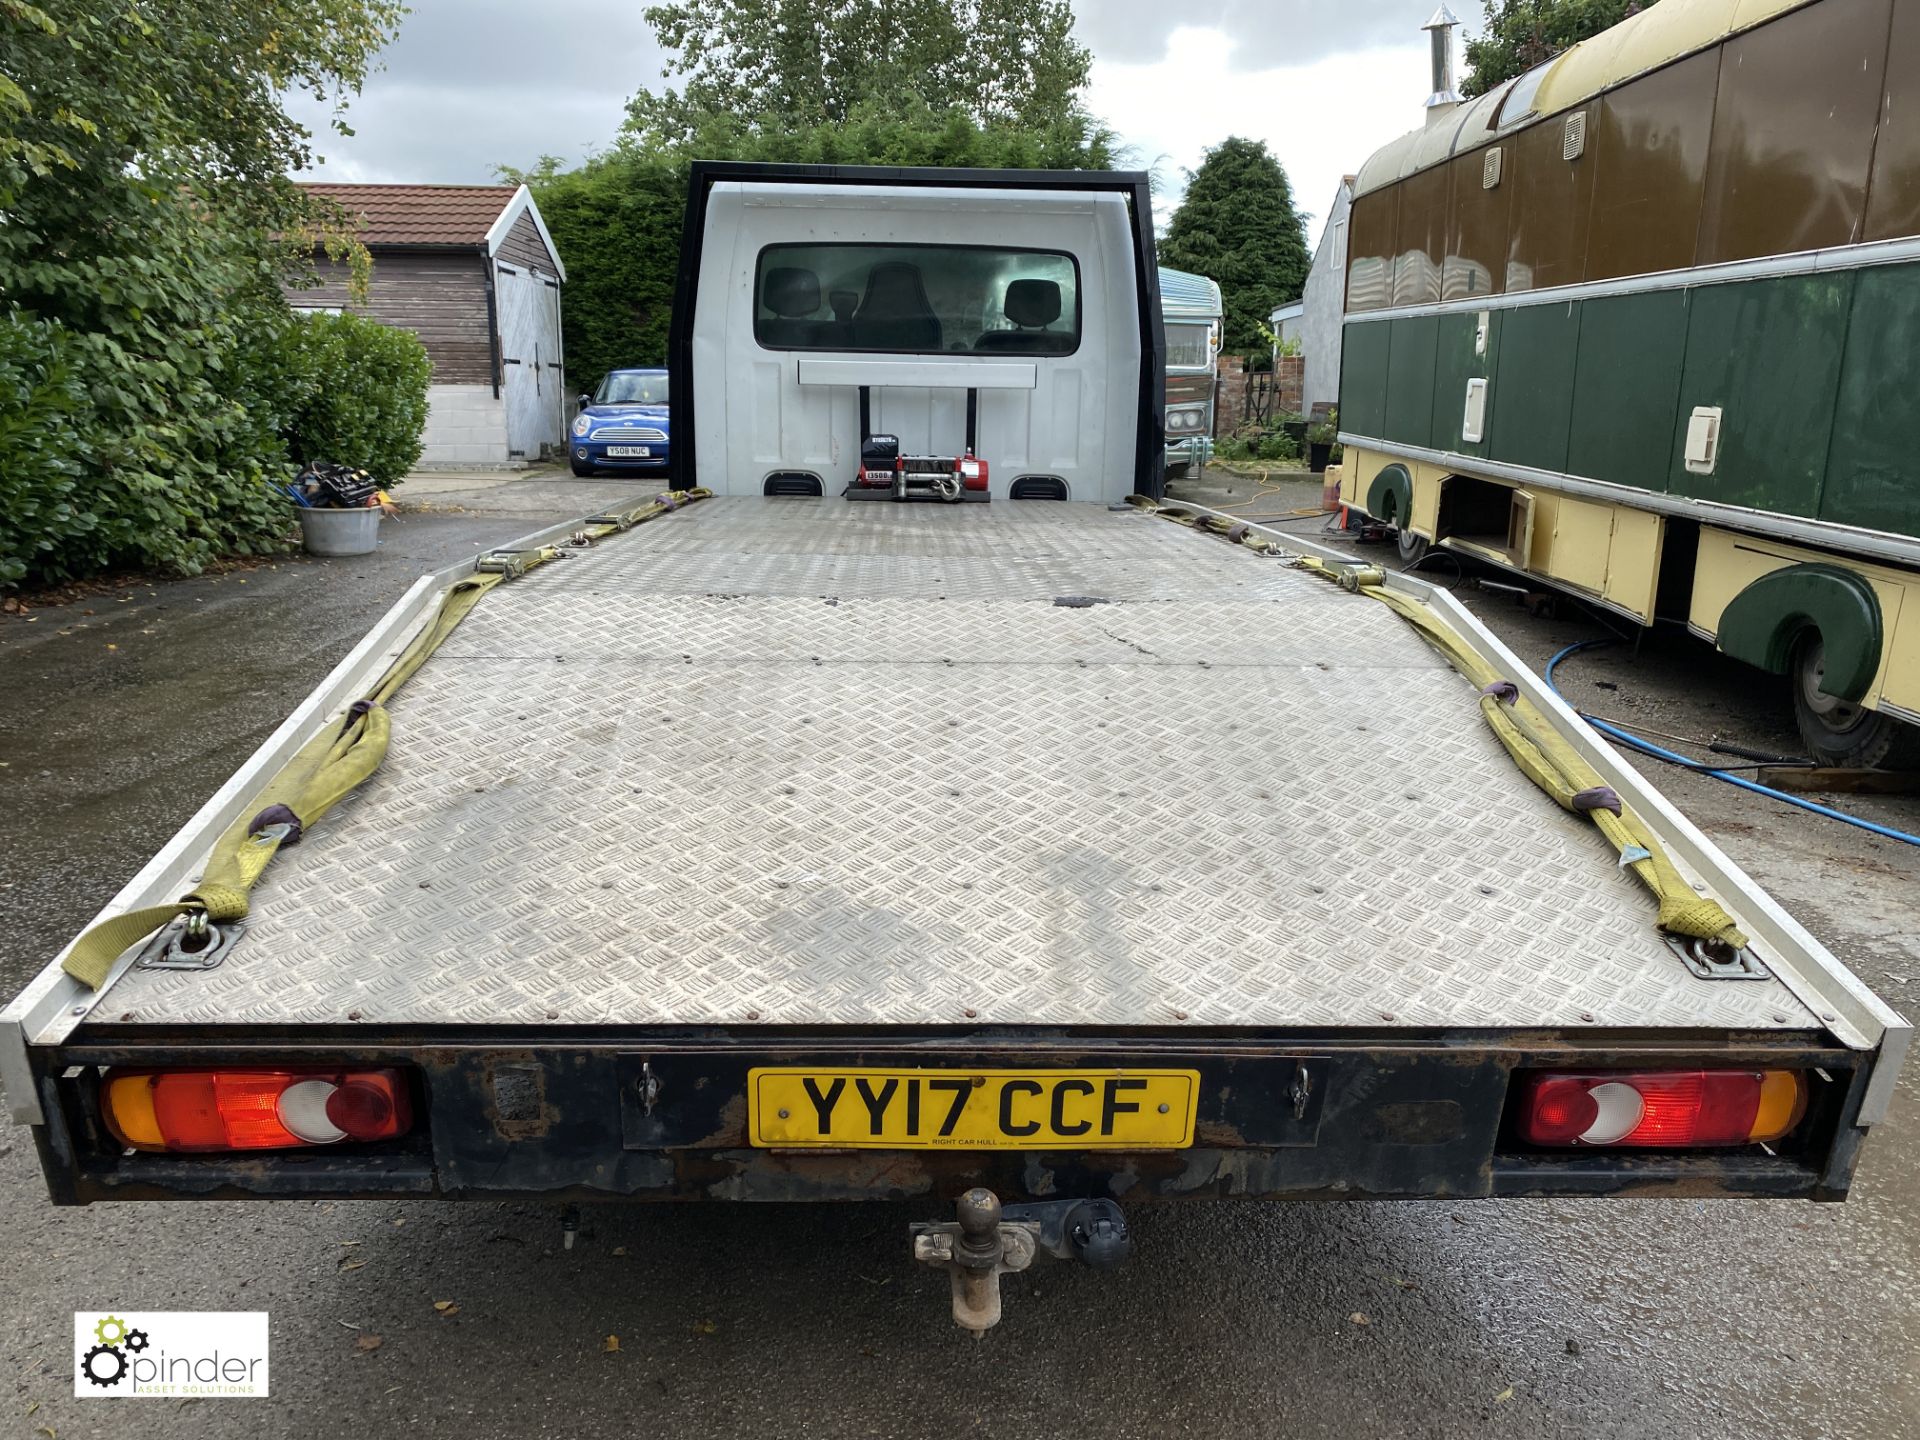 Renault Master FWD LL35 dci 130 Recovery Truck, registration YY17 CCF, date of registration 31 March - Image 6 of 20